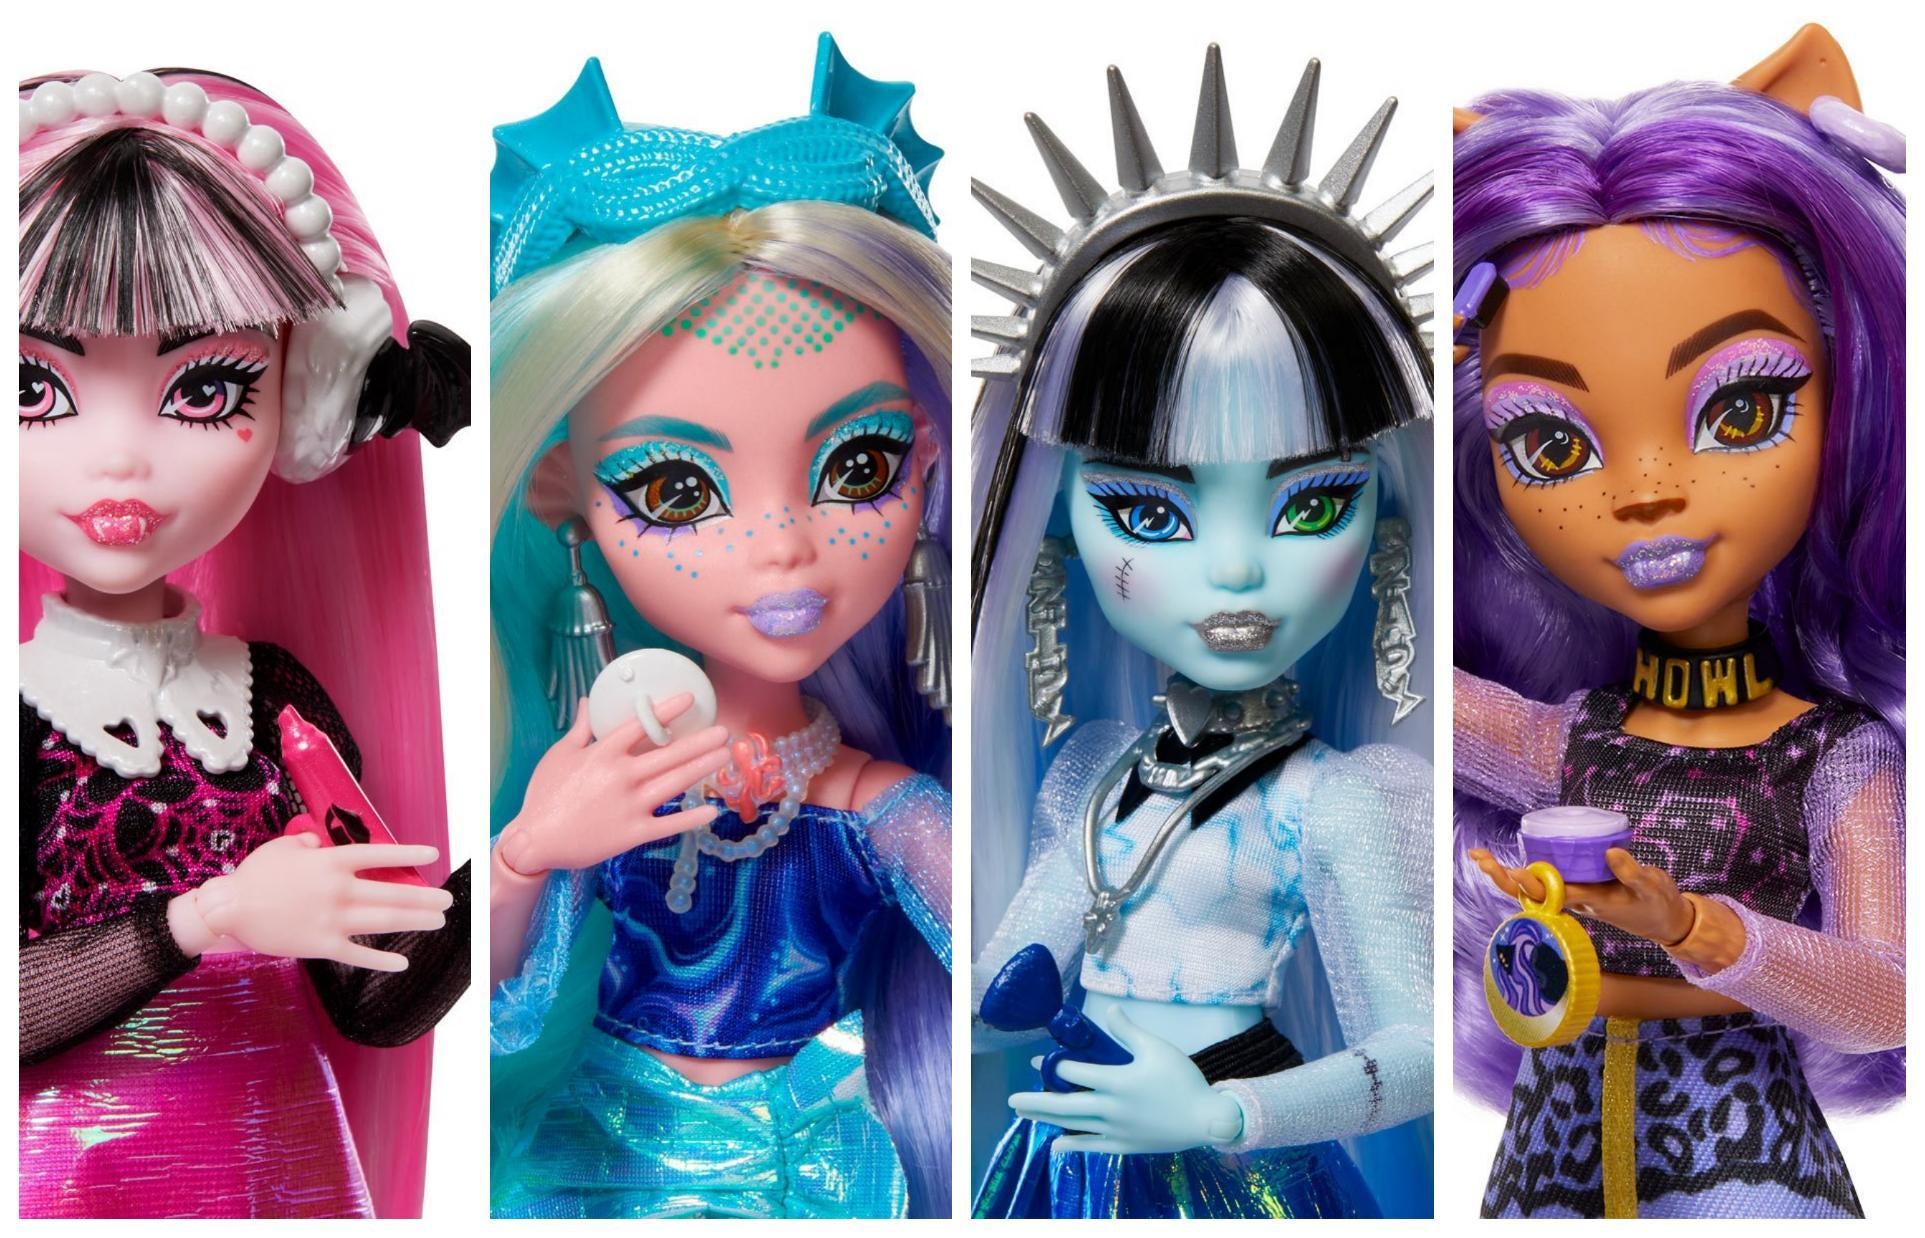 Monster High Fearidescent Series of Dolls Offers a Spooktacular